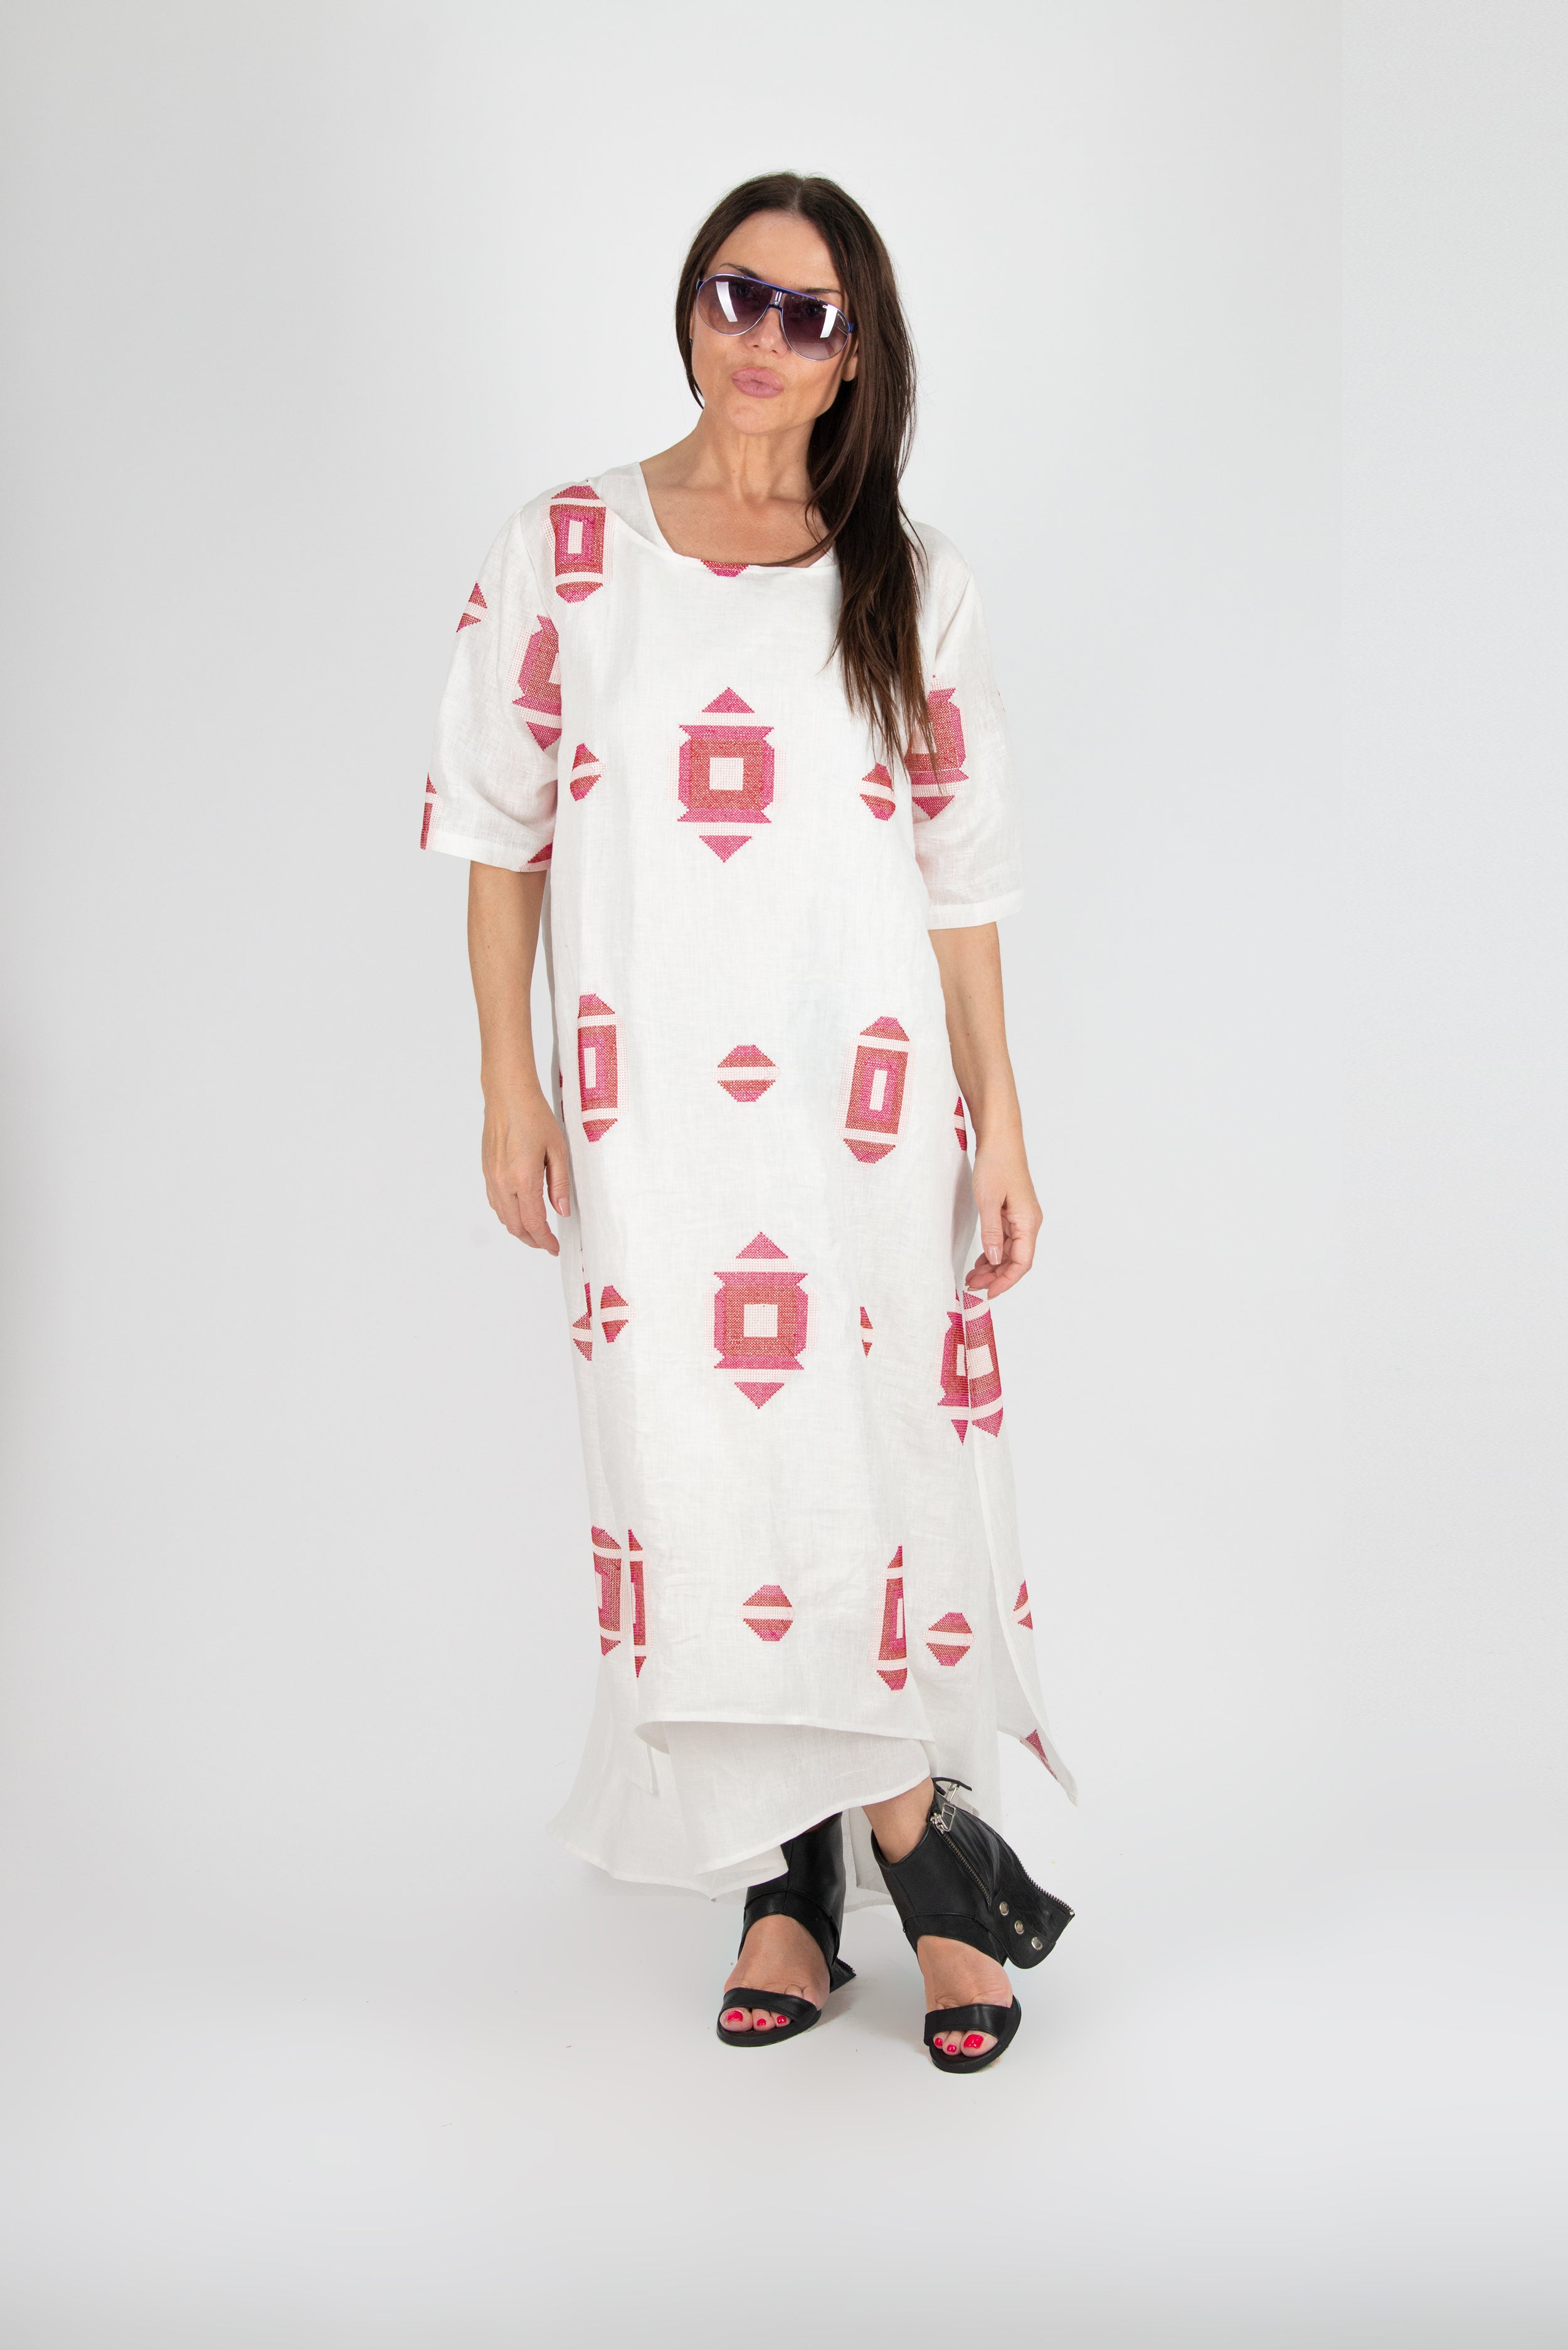 Off White Linen Dress in 2 parts with Short Sleeves by EUG Fashion